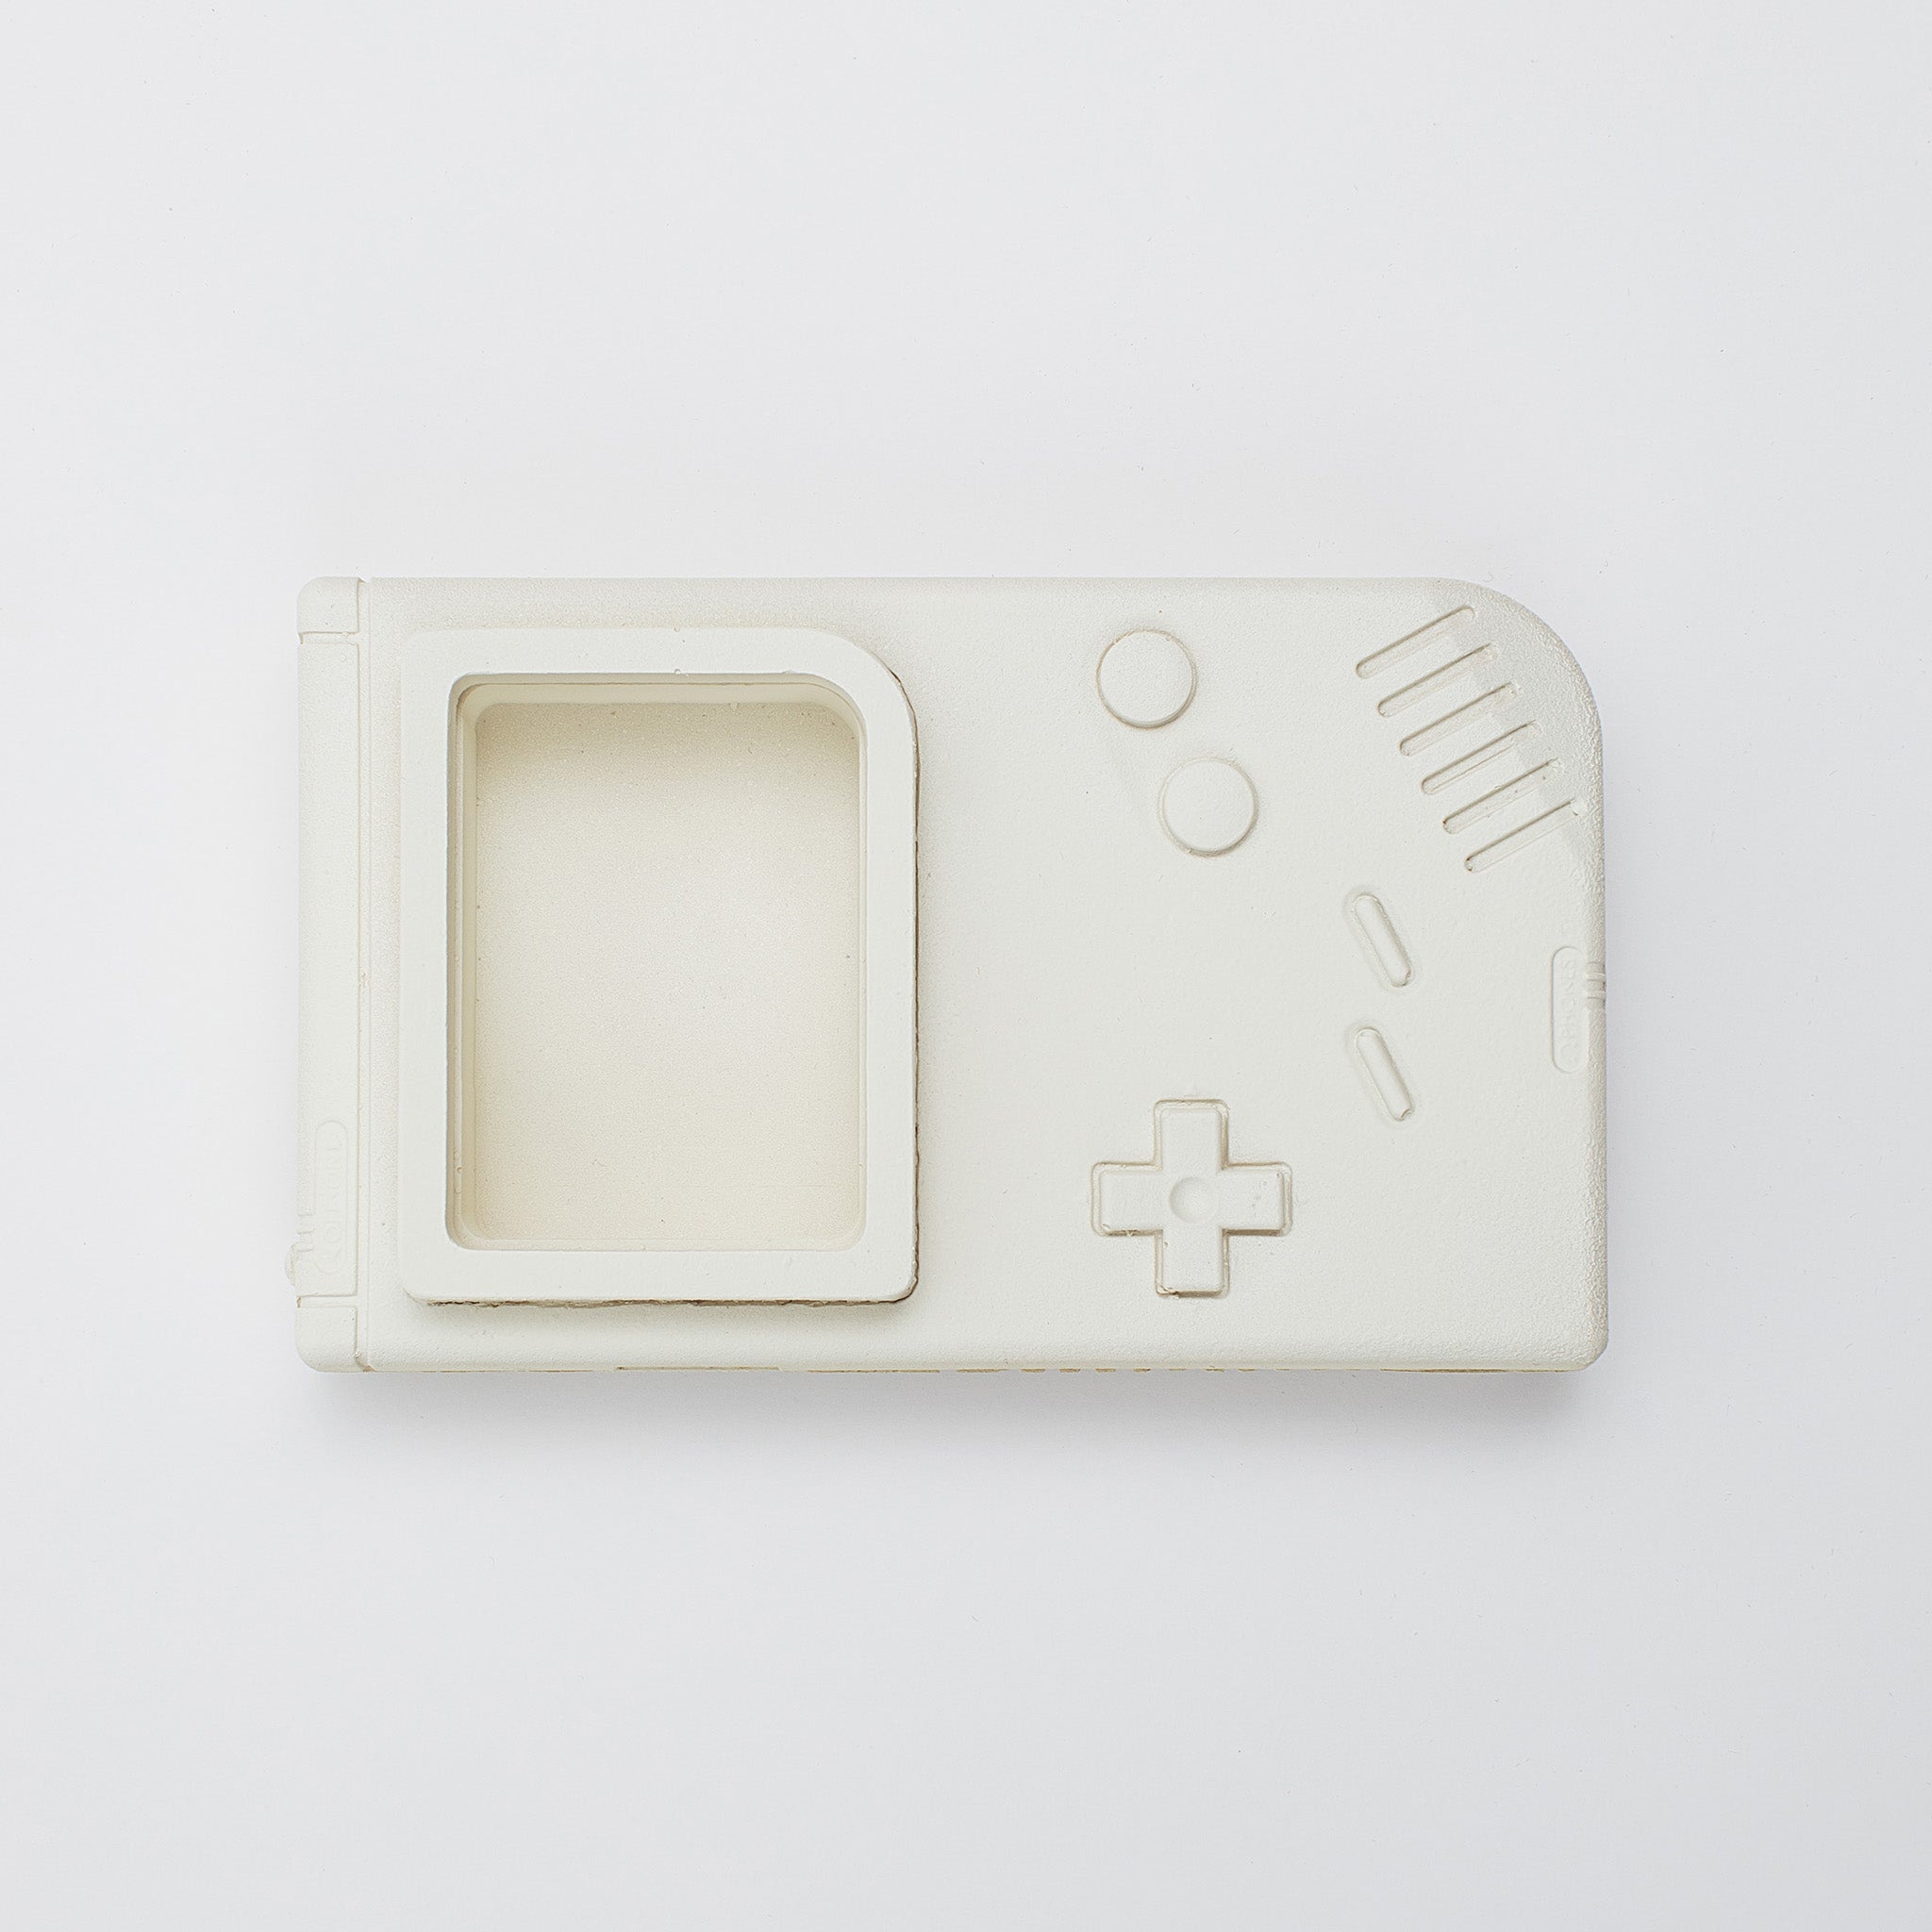 Top view of classic Nintendo gameboy game console indoor planter